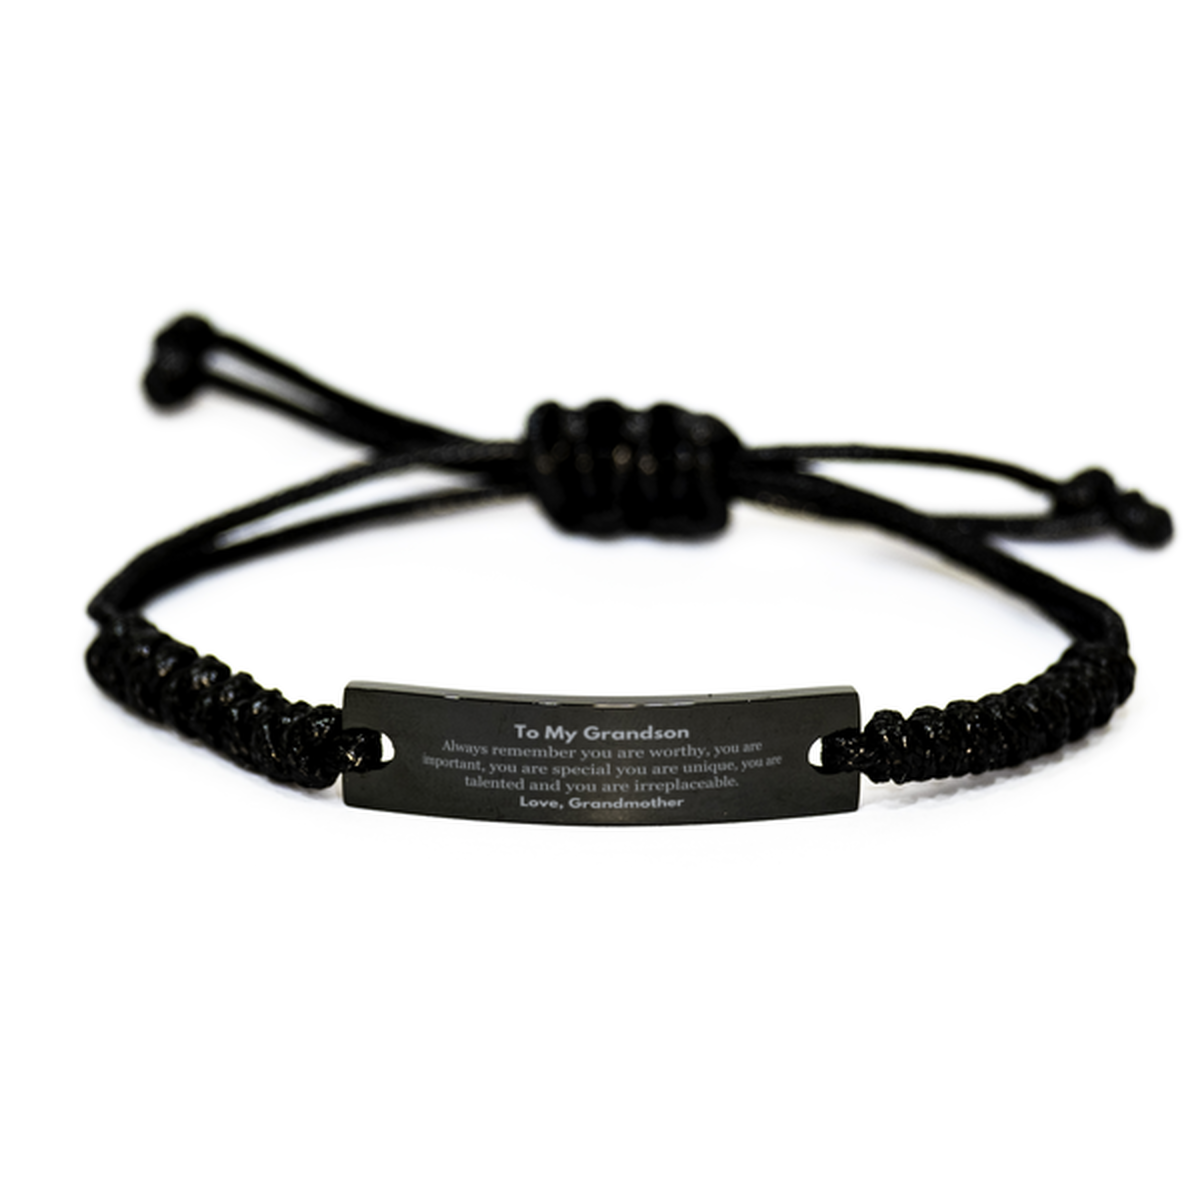 Grandson Birthday Gifts from Grandmother, Inspirational Black Rope Bracelet for Grandson Christmas Graduation Gifts for Grandson Always remember you are worthy, you are important. Love, Grandmother